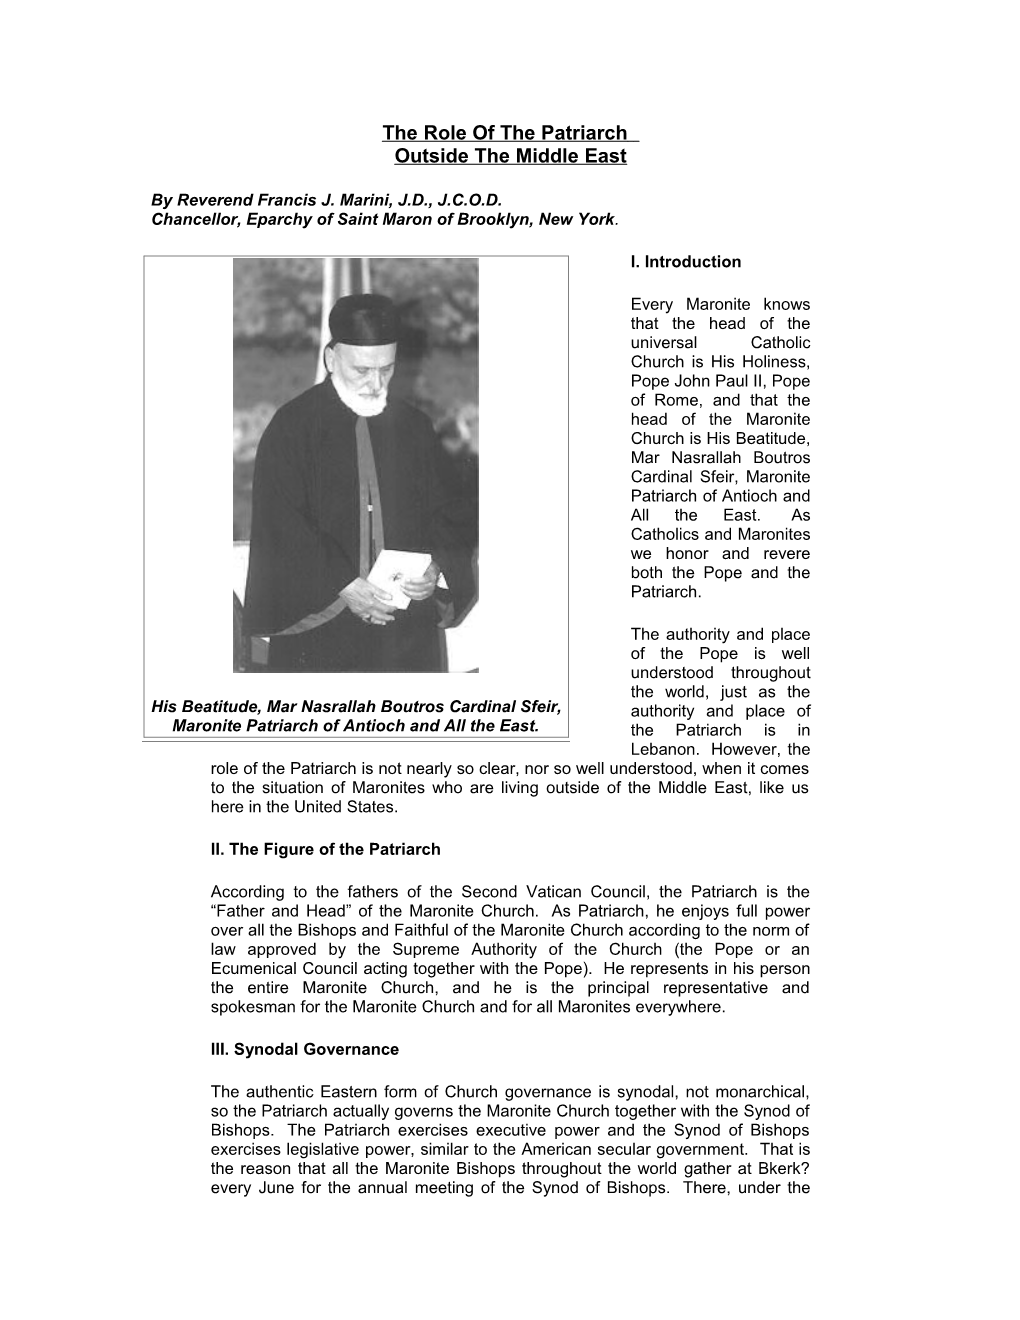 The Role of the Patriarch